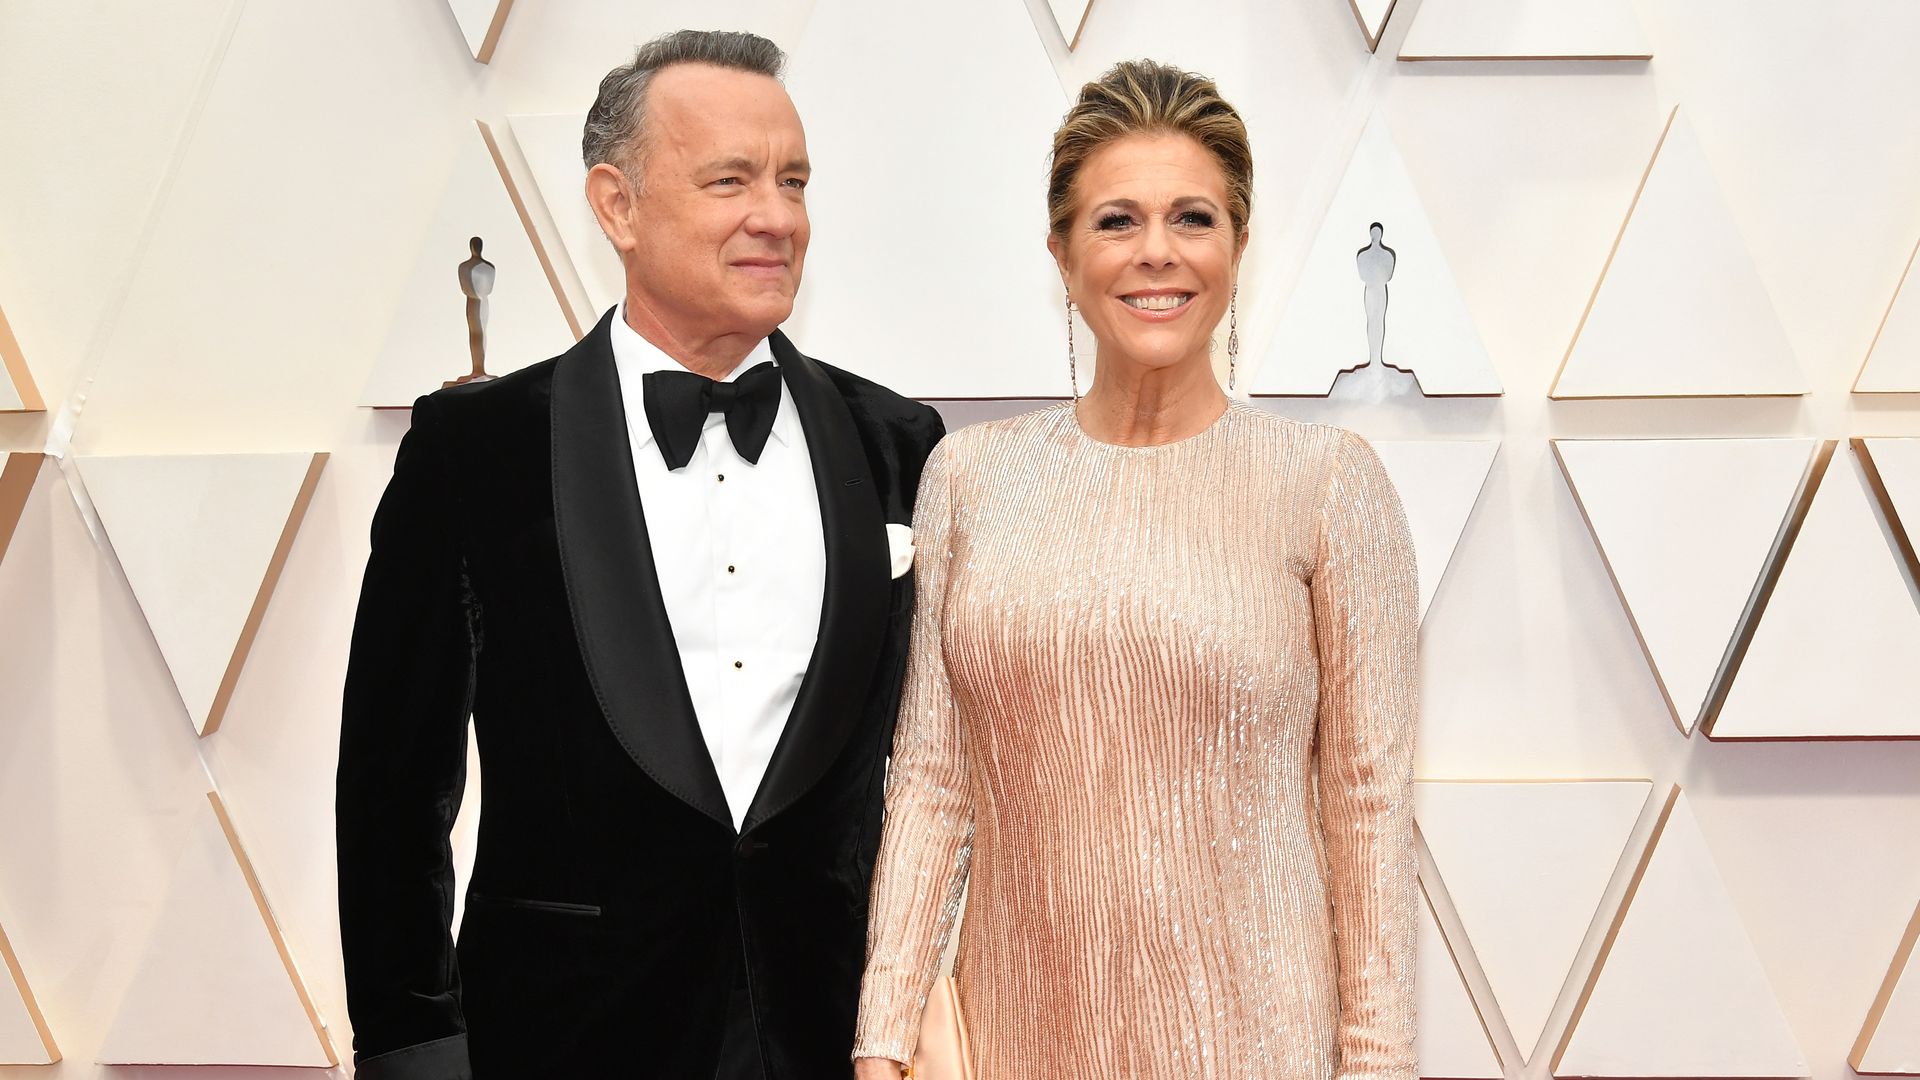 In this image, Tom Hanks and Rita Wilson stand next to each other 